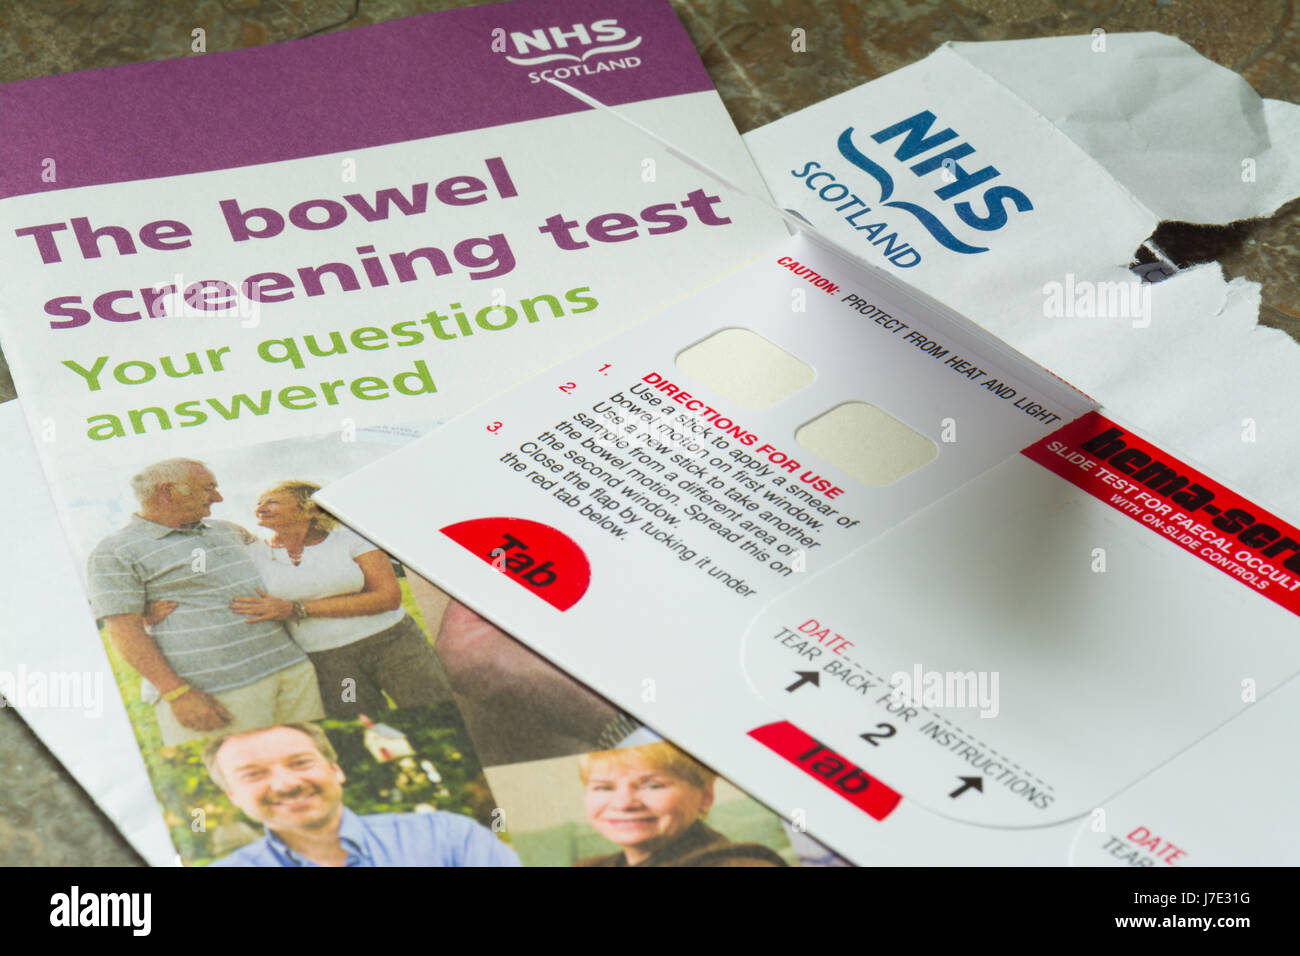 Bowel Screening test kit provided by post to over 50s by the NHS Scotland Stock Photo